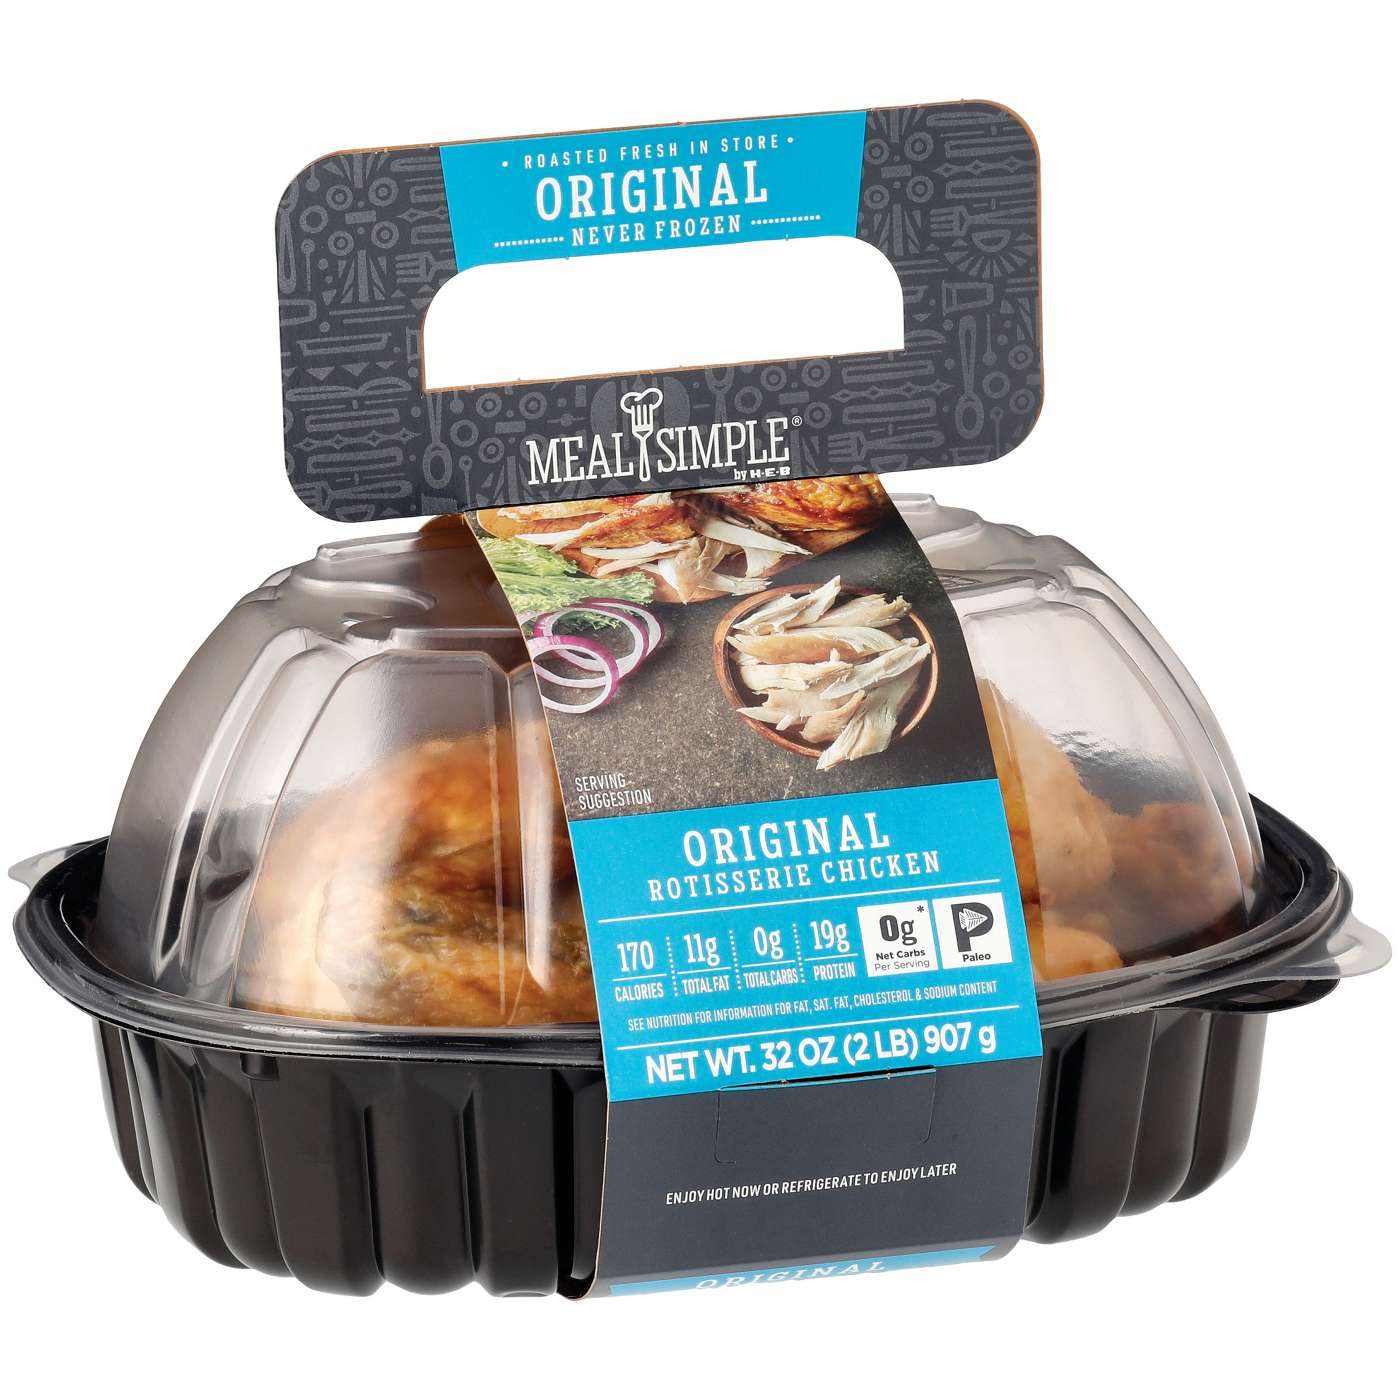 Meal Simple by H-E-B Rotisserie Chicken - Original; image 1 of 2